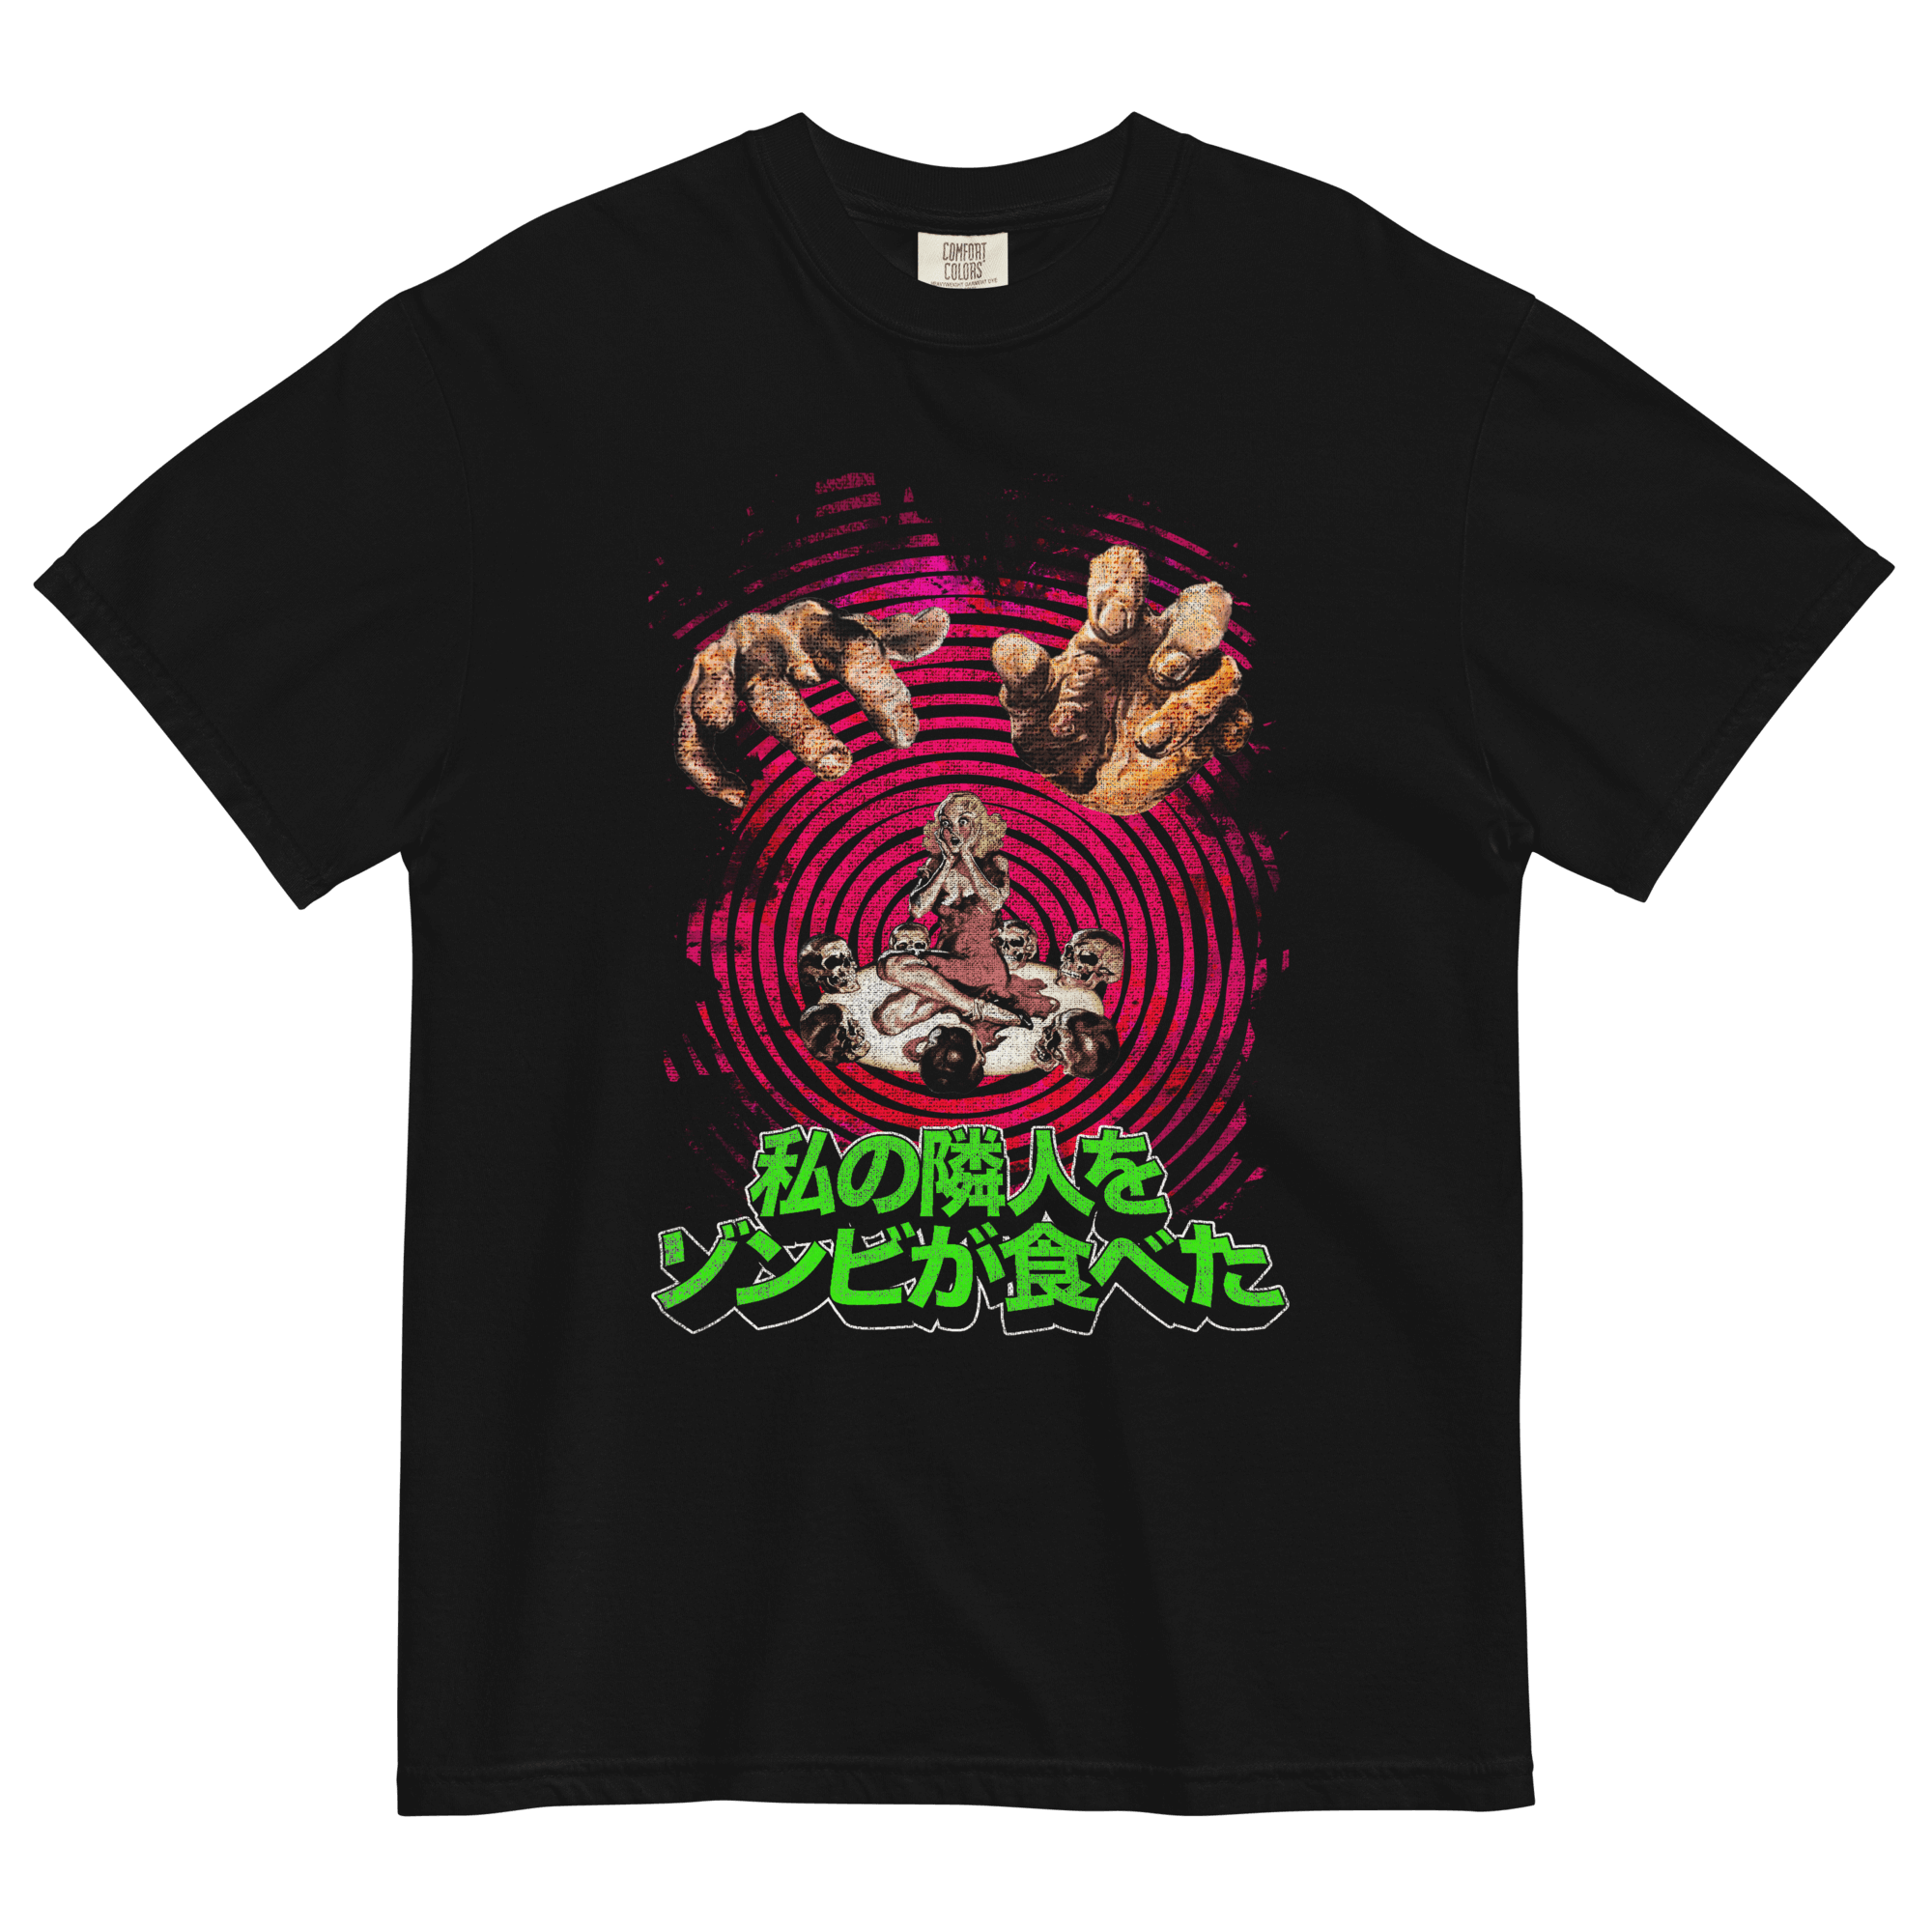 Zombie Game Japanese T-shirtSink your teeth into our trendy Zombie Game Japanese T-shirt. Perfect for layering, this 100% cotton tee will have you ruling the streets. Invest in style! • 100% ring-spun cotton • Fabric weight: 6.1 oz/yd² (206.8 g/m²) • Garm